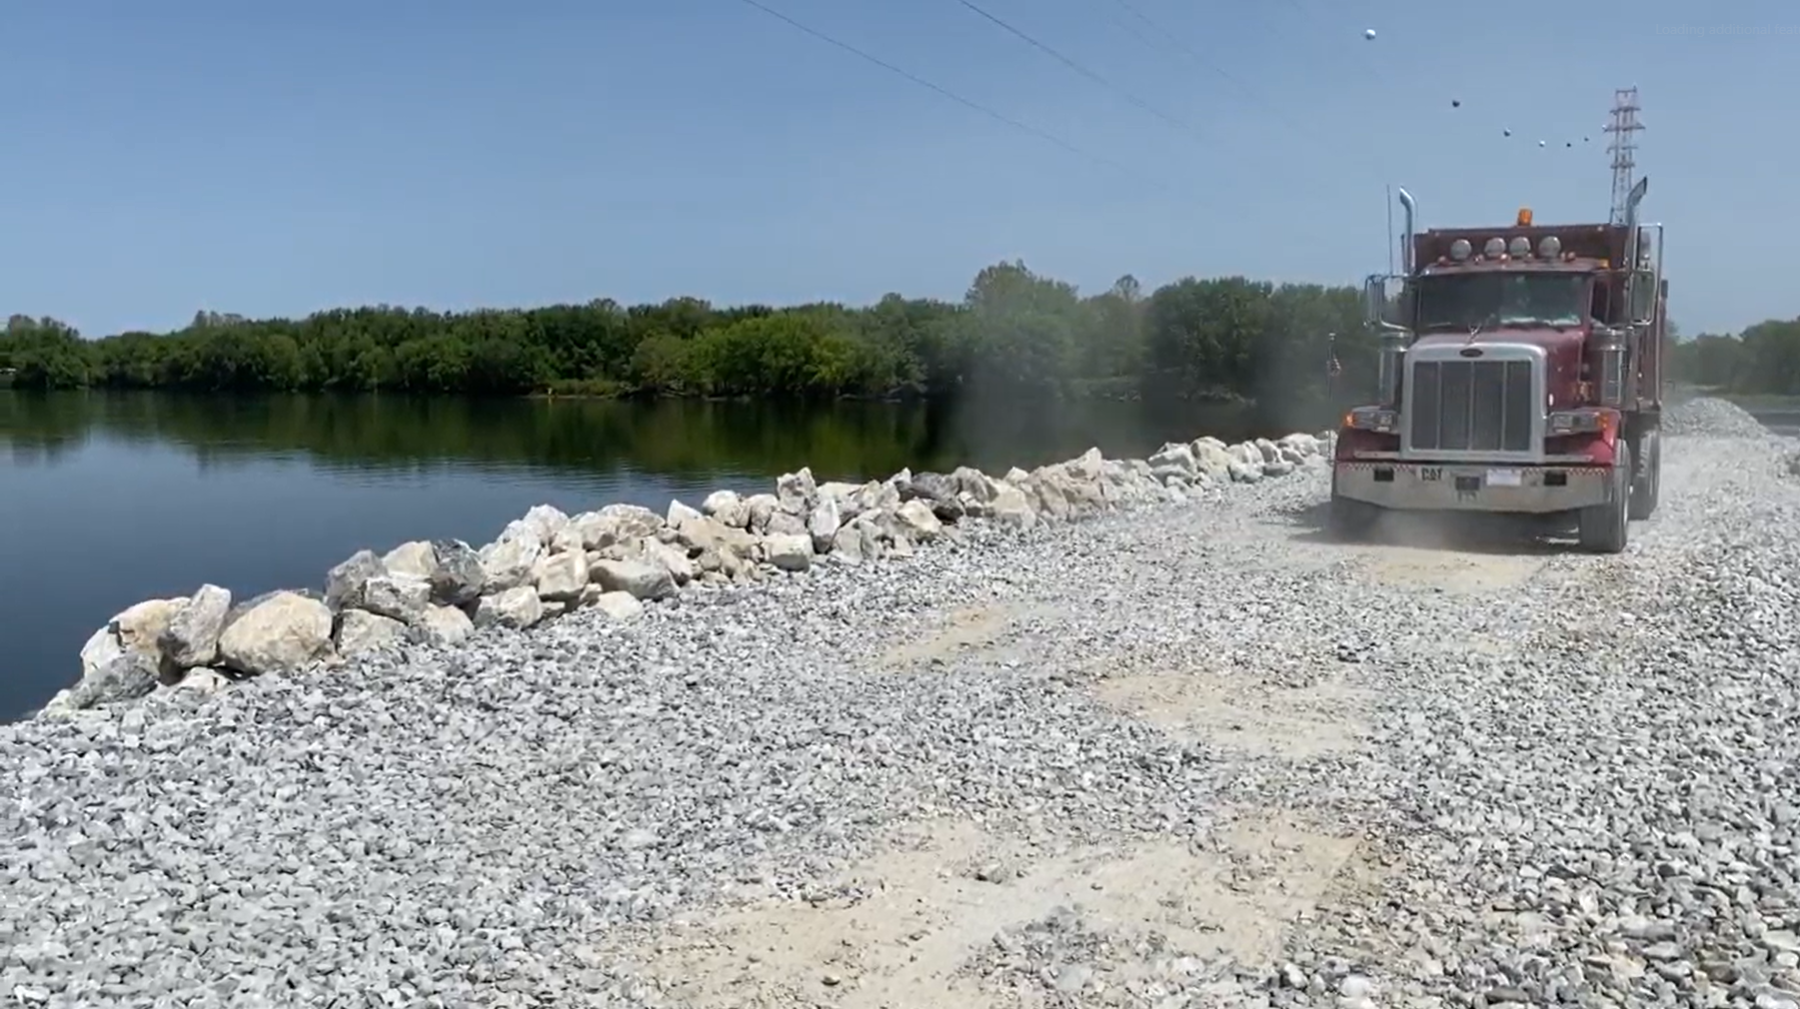 PPL Electric Utilities - Stone Causeway Construction B-Roll - Dump Truck and River (7 Seconds)